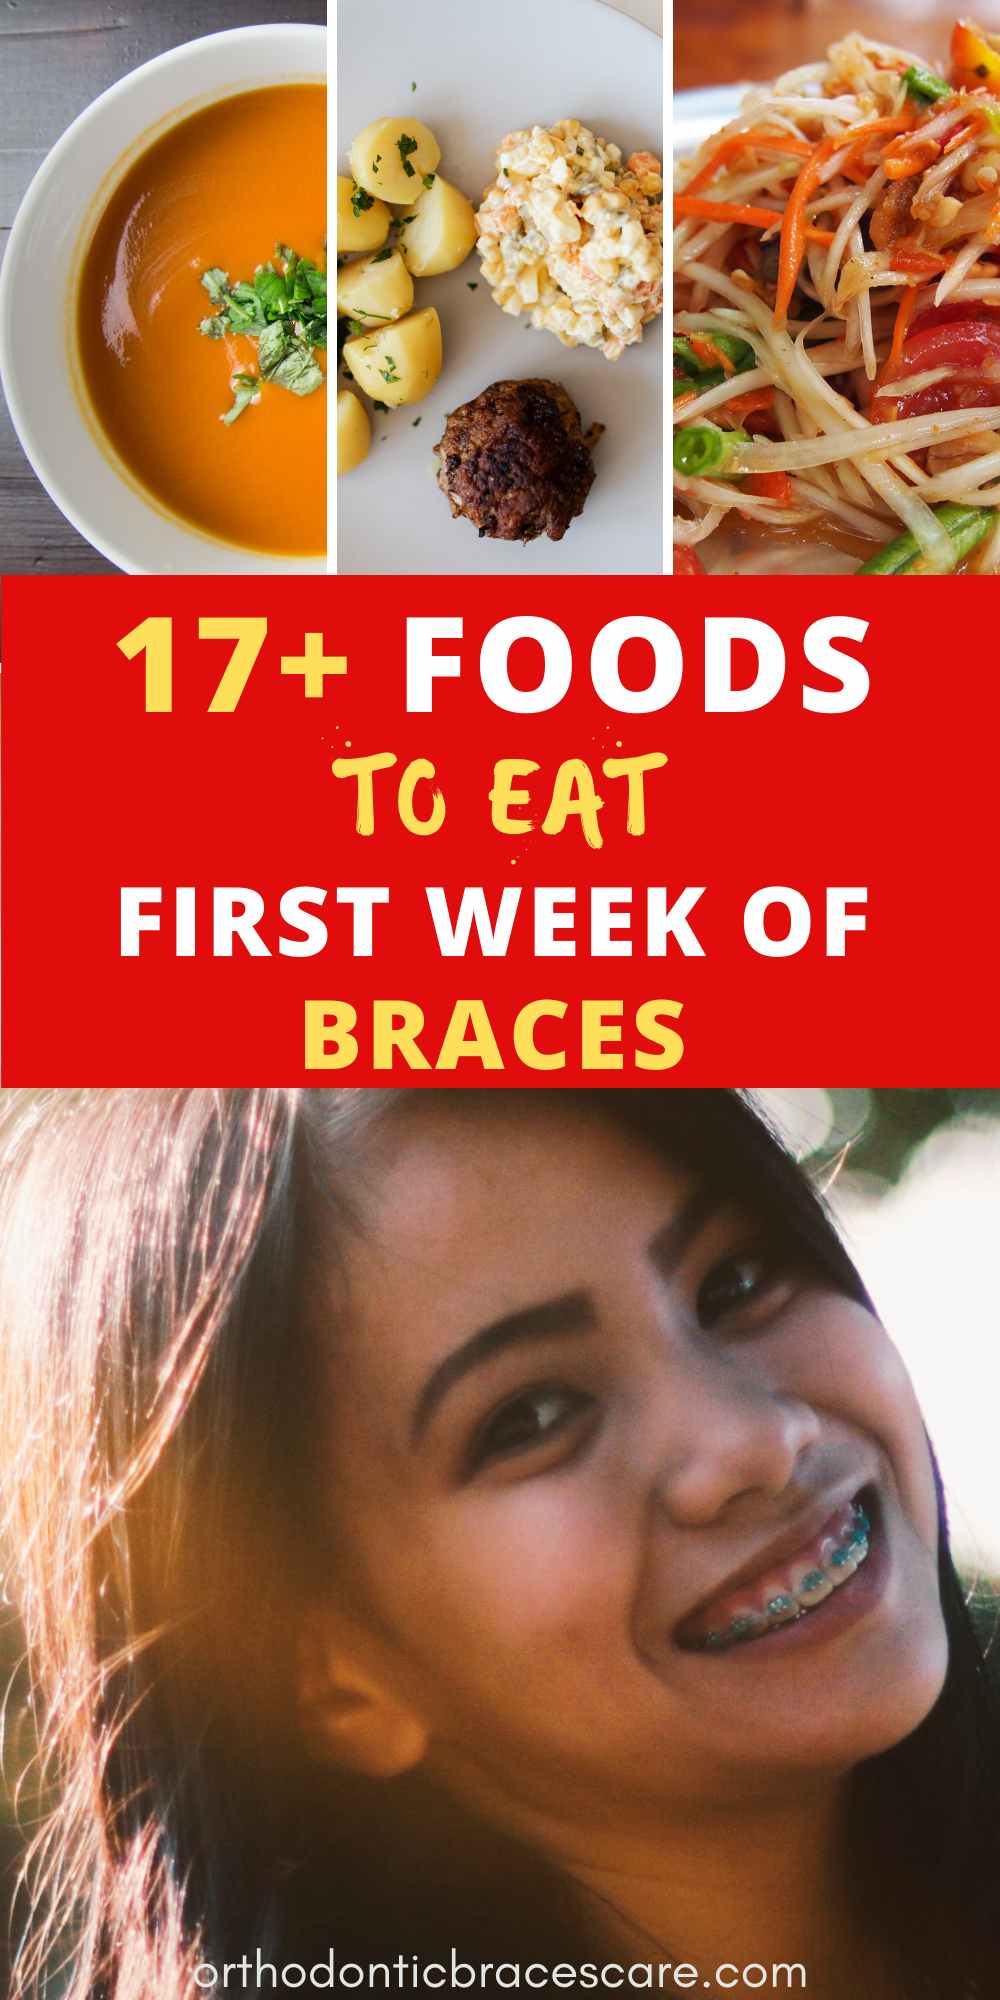 What To Eat With Braces, The First Week [With List] - Orthodontic